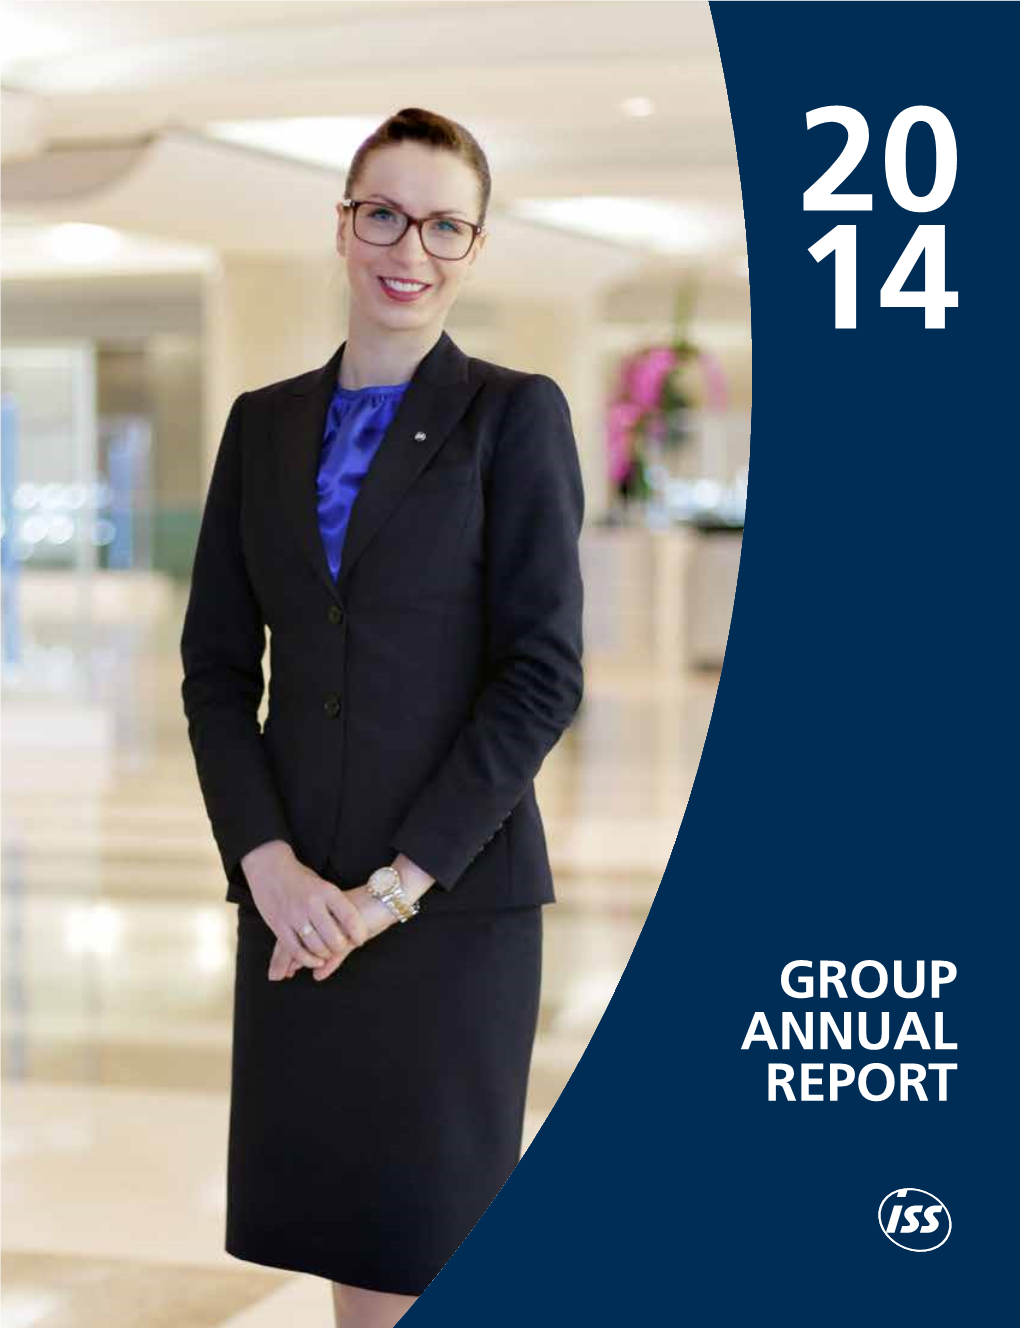 Group Annual Report